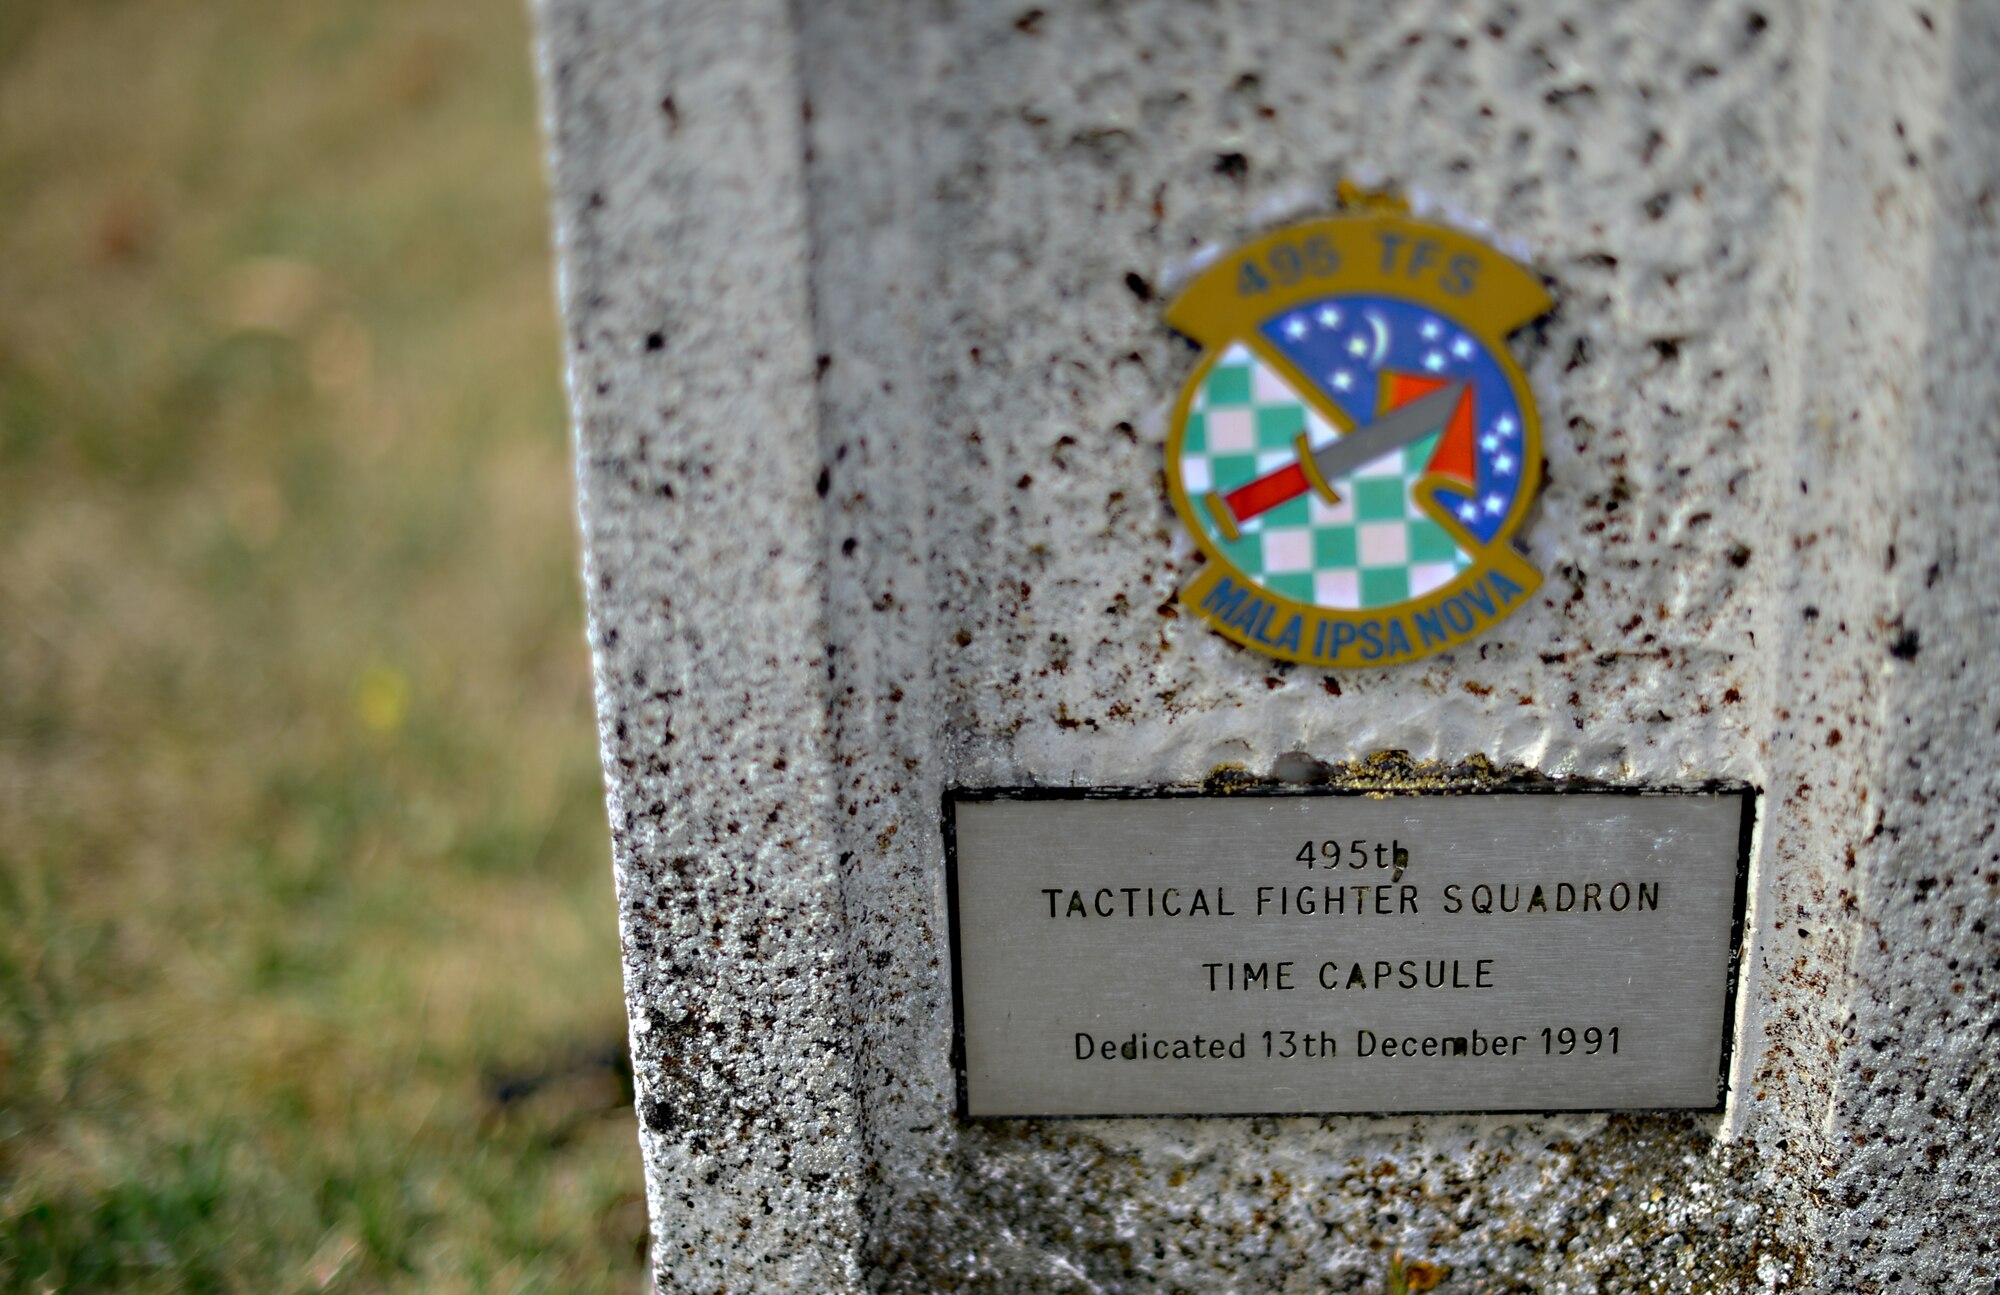 A time capsule memorial dedicated to Royal Air Force Lakenheath’s once active 495th Tactical Fighter Squadron, was placed at RAF Lakenheath, England, Dec. 13, 1991. Activated in 1977, the squadron functioned as a replacement training unit for the Liberty Wing’s 492nd, 493rd and 494th Fighter Squadrons that are still active today. (U.S. Air Force photo by Senior Airman Erin O’Shea/Released)